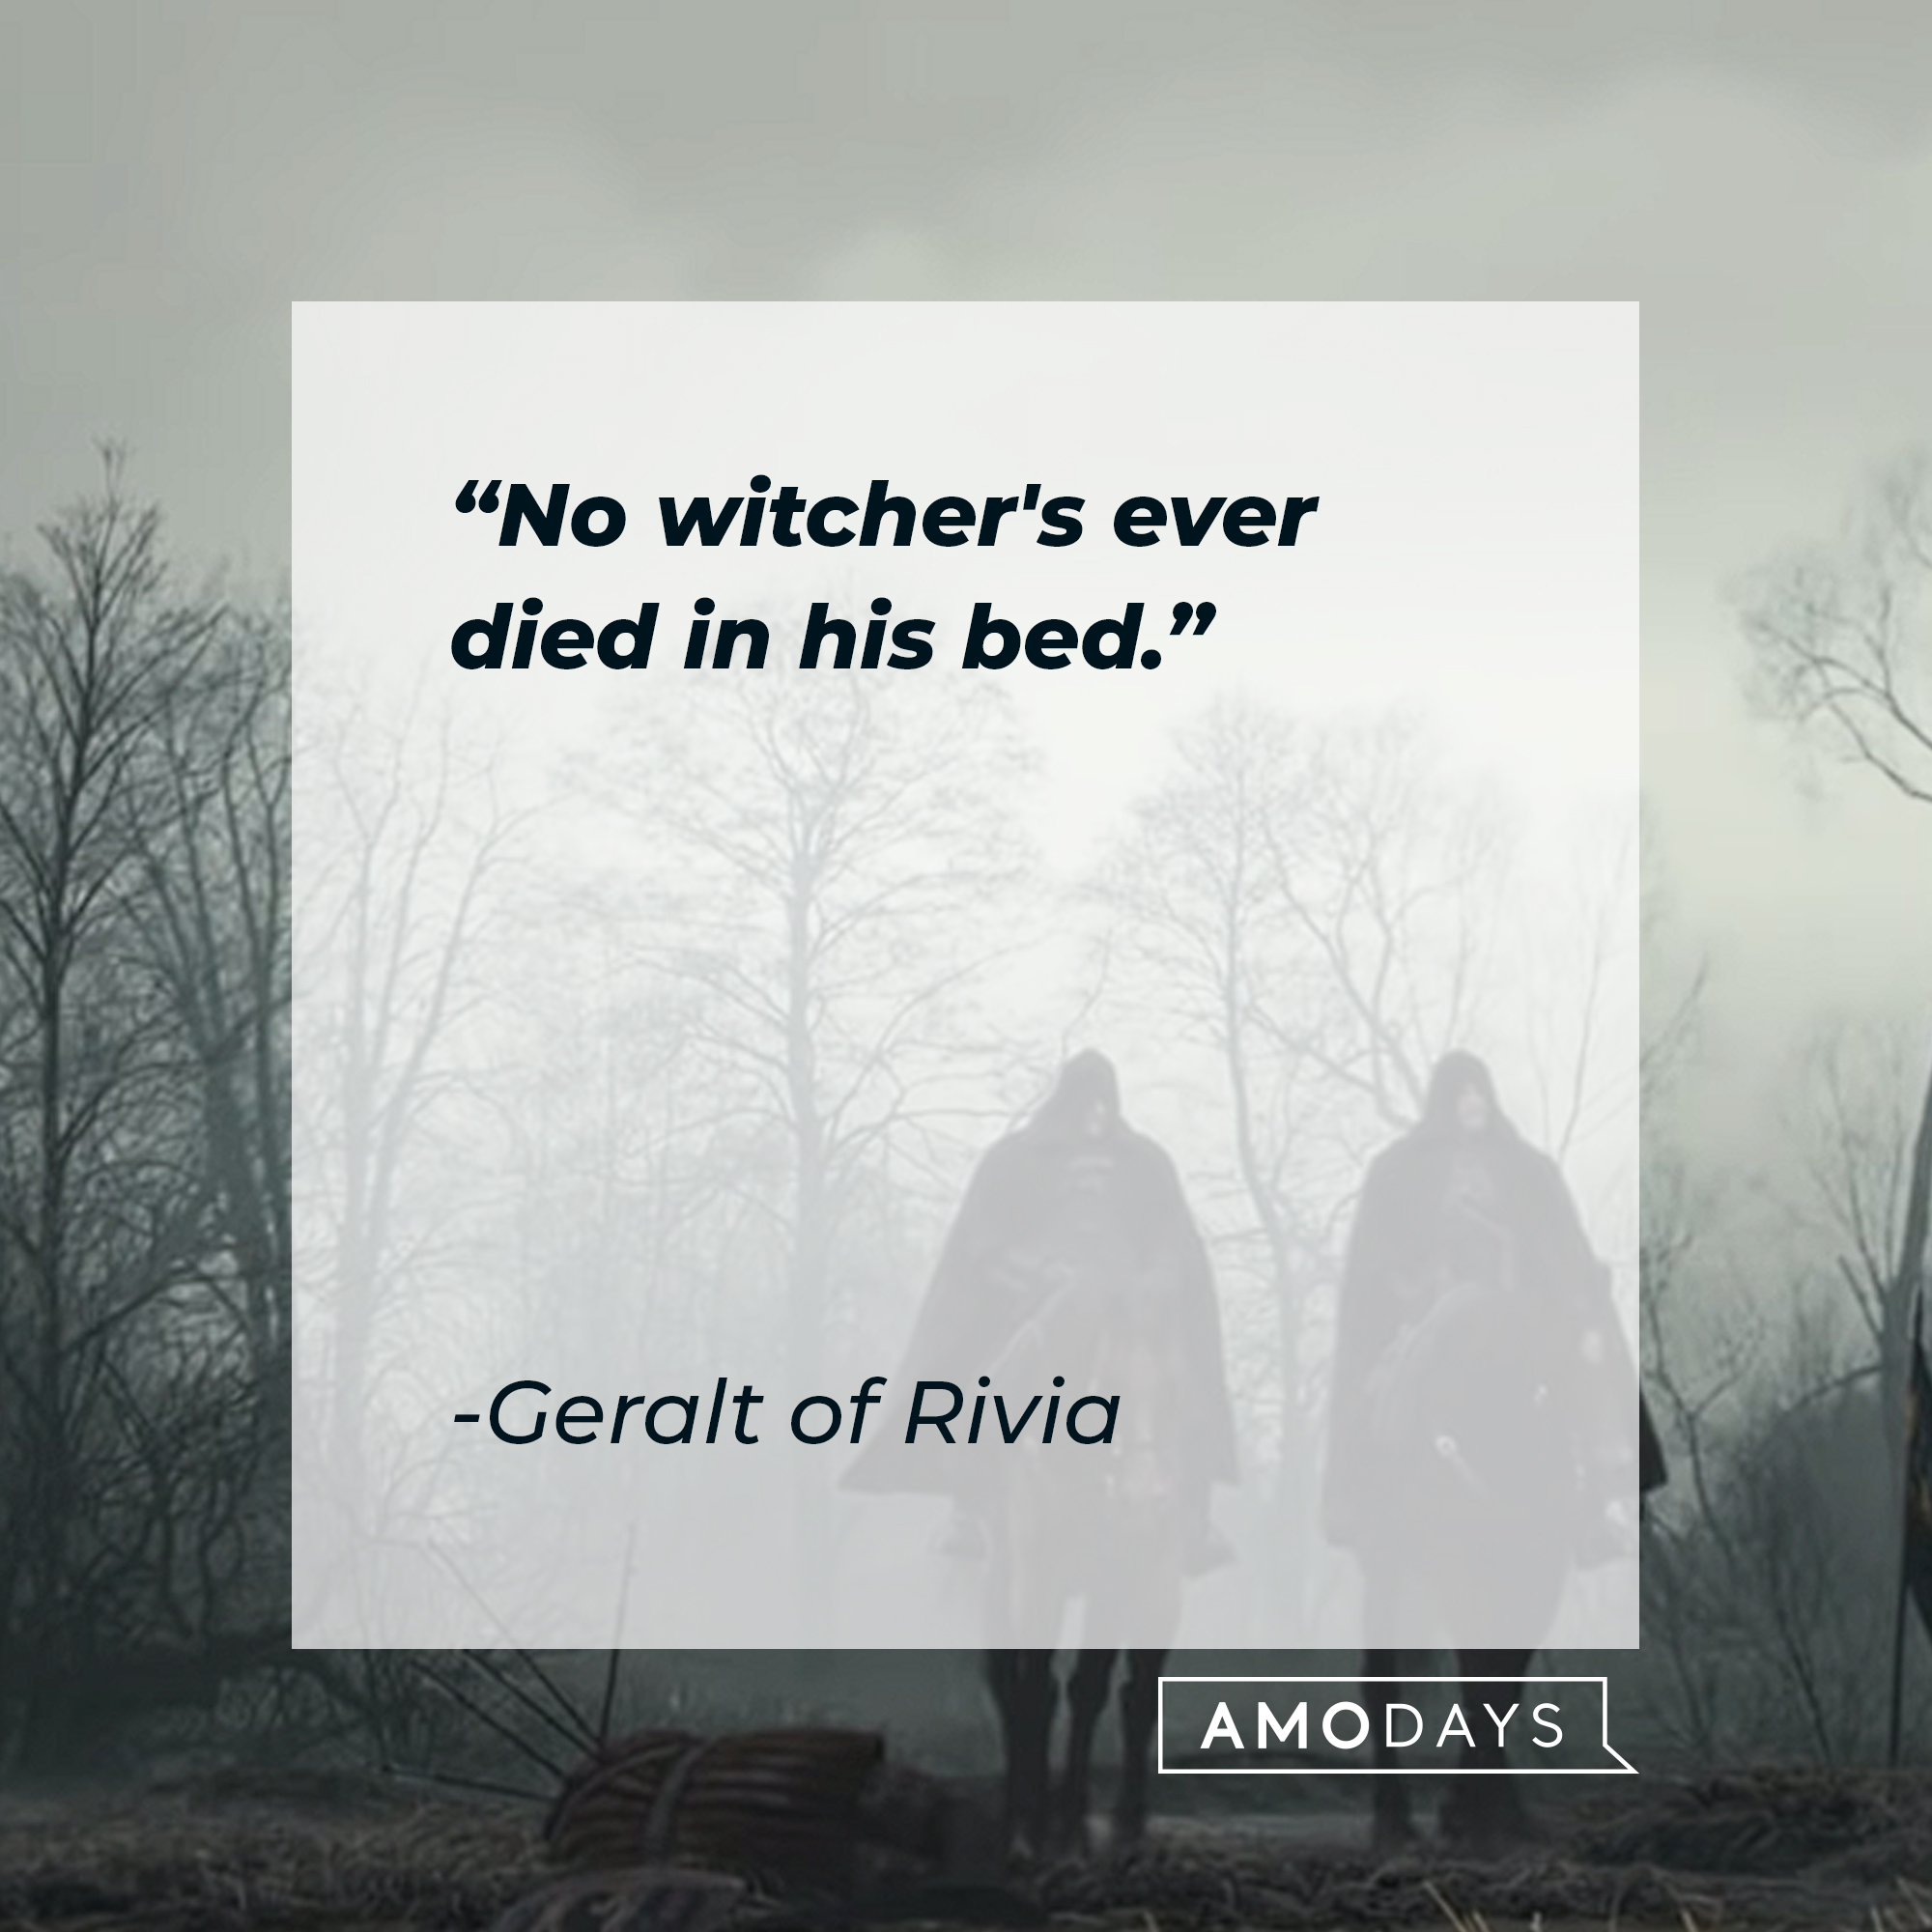 Geralt of Rivia from the video game with his quote: “No witcher's ever died in his bed."  | Source: youtube.com/thewitcher